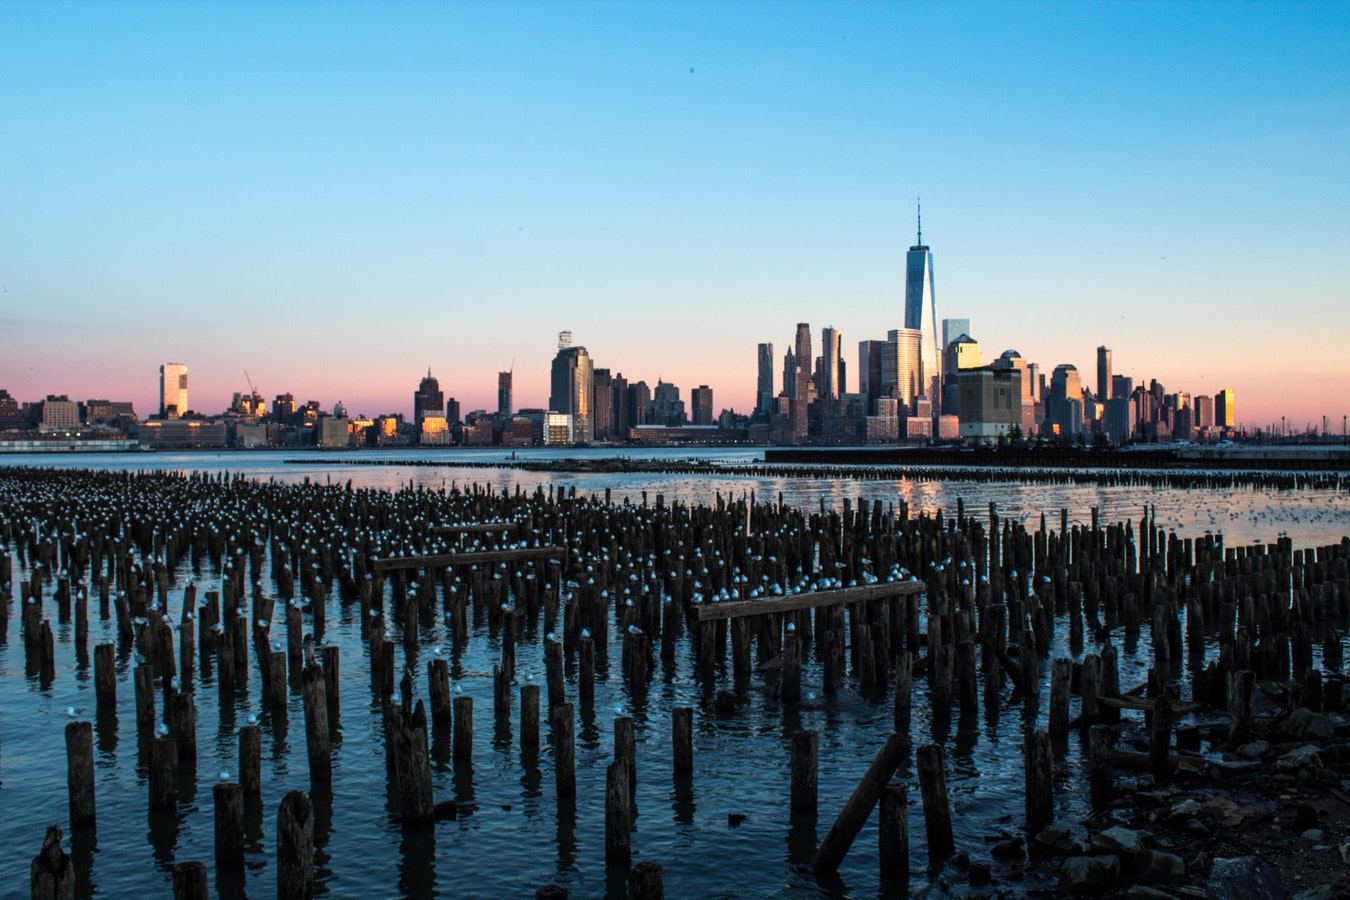 The view of NYC from Jersey City.